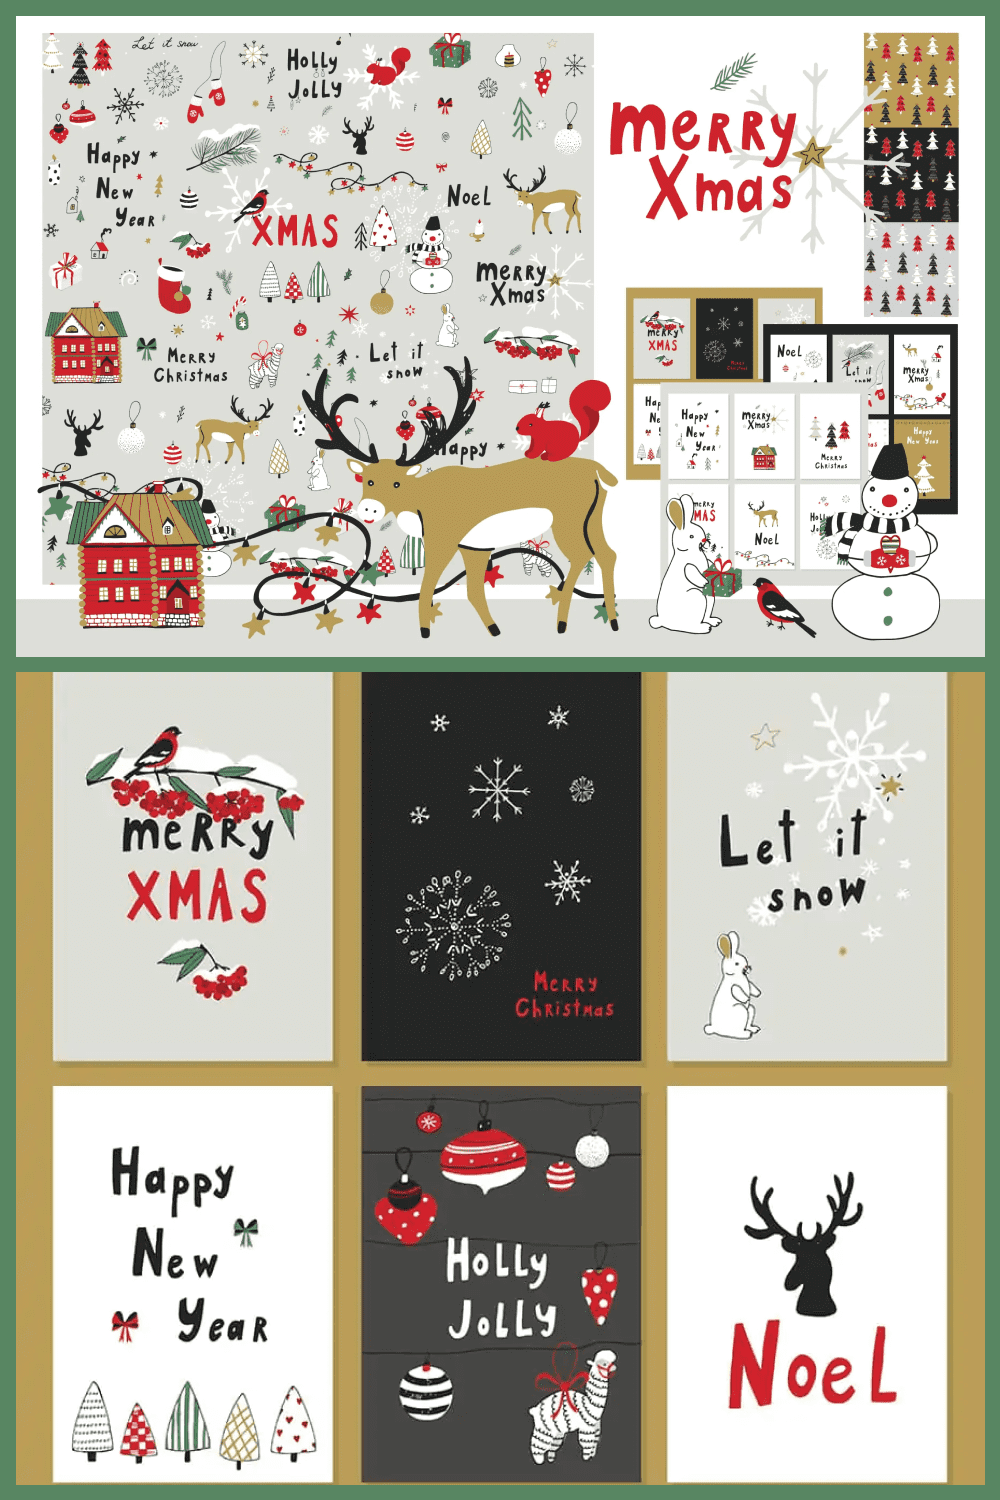 Collage with Christmas patterns cards on black, gray, white background with lettering and illustrations.